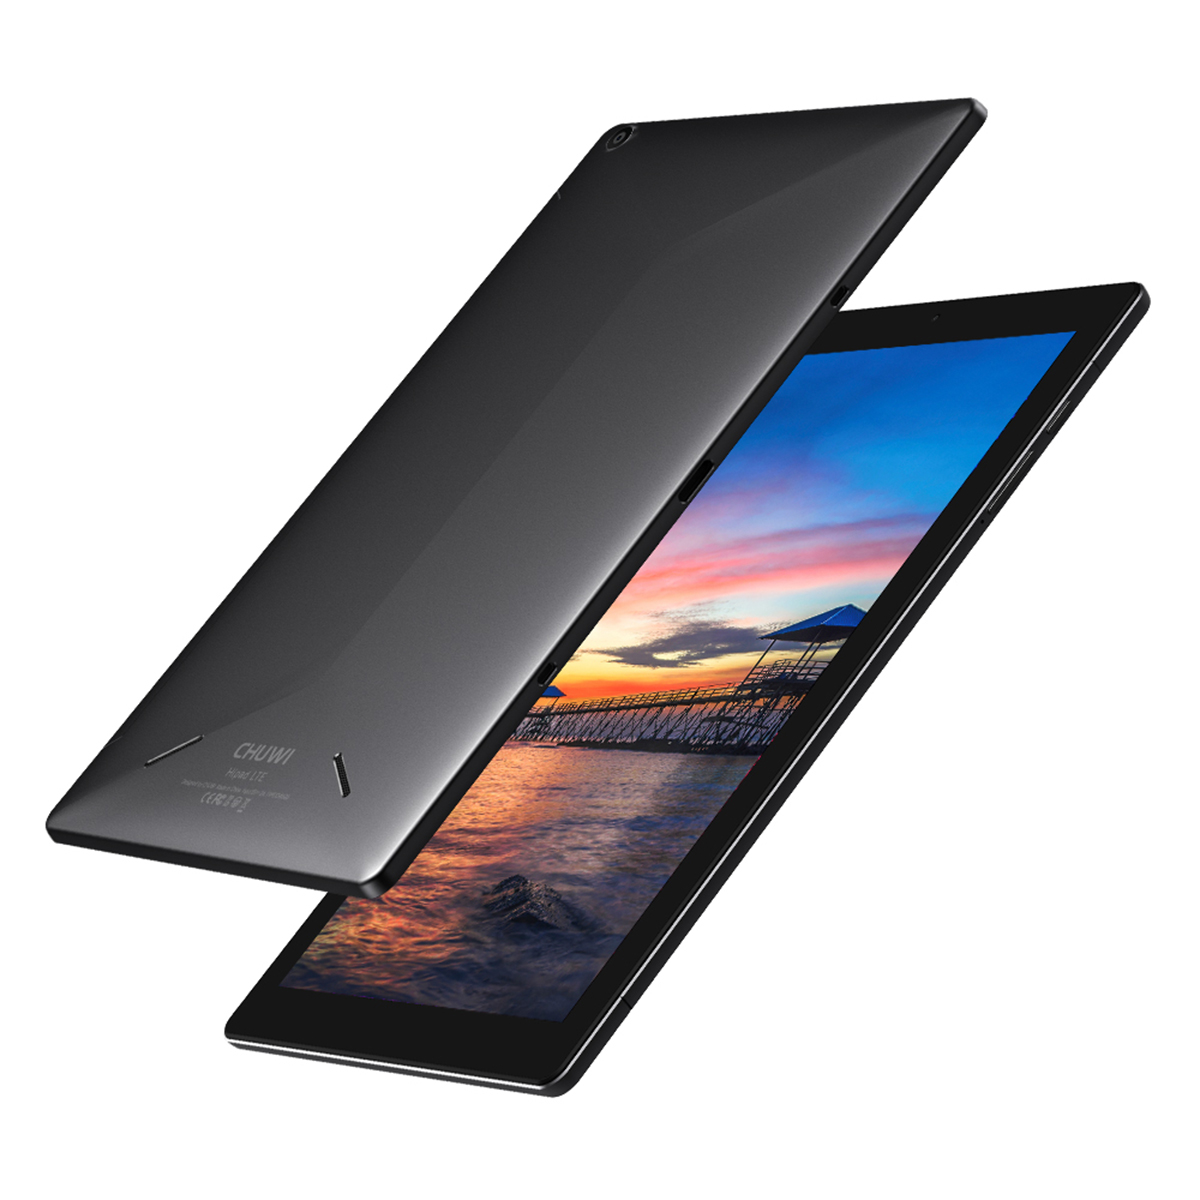 Find CHUWI HiPad LTE MTK6797X Helio X27 Deca Core 3GB RAM 32GB ROM 4G LTE 10 1 Inch Android 8 0 Tablet for Sale on Gipsybee.com with cryptocurrencies